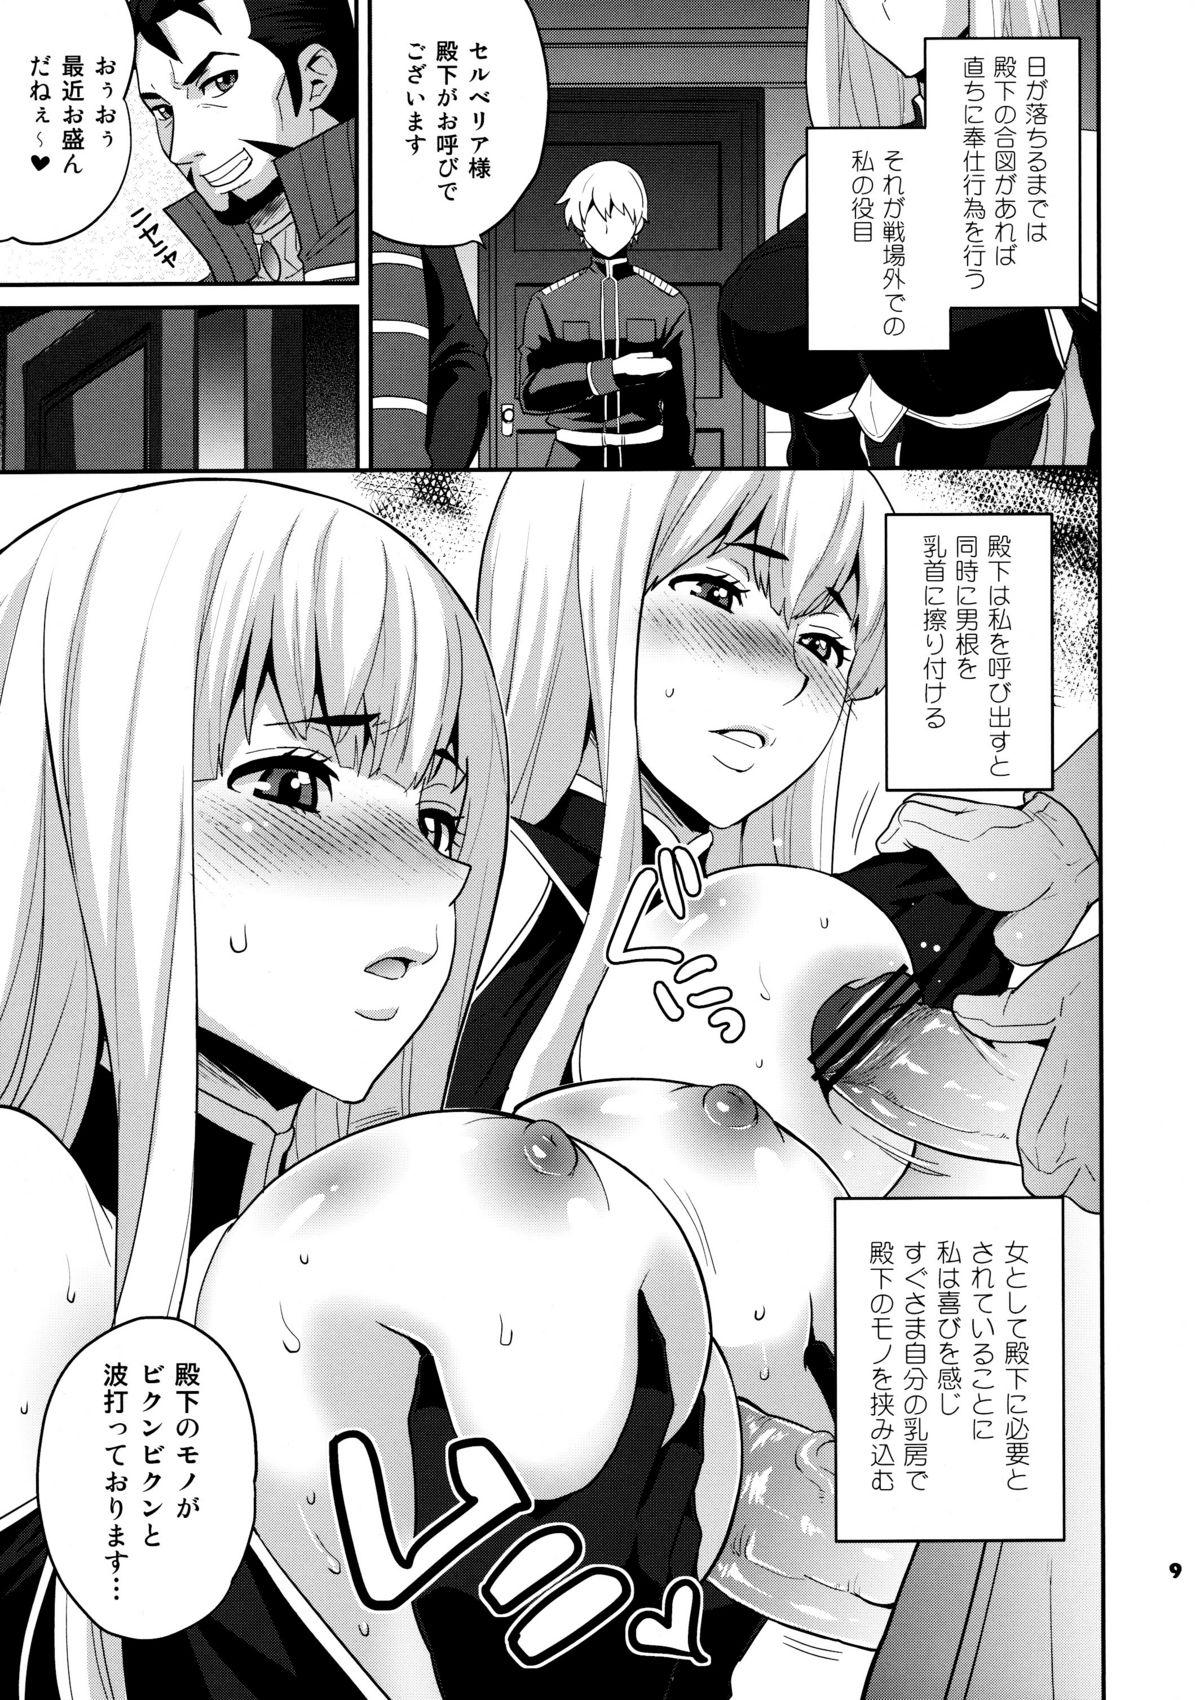 Cam Sex Blue Reflection - Valkyria chronicles Gym - Page 9